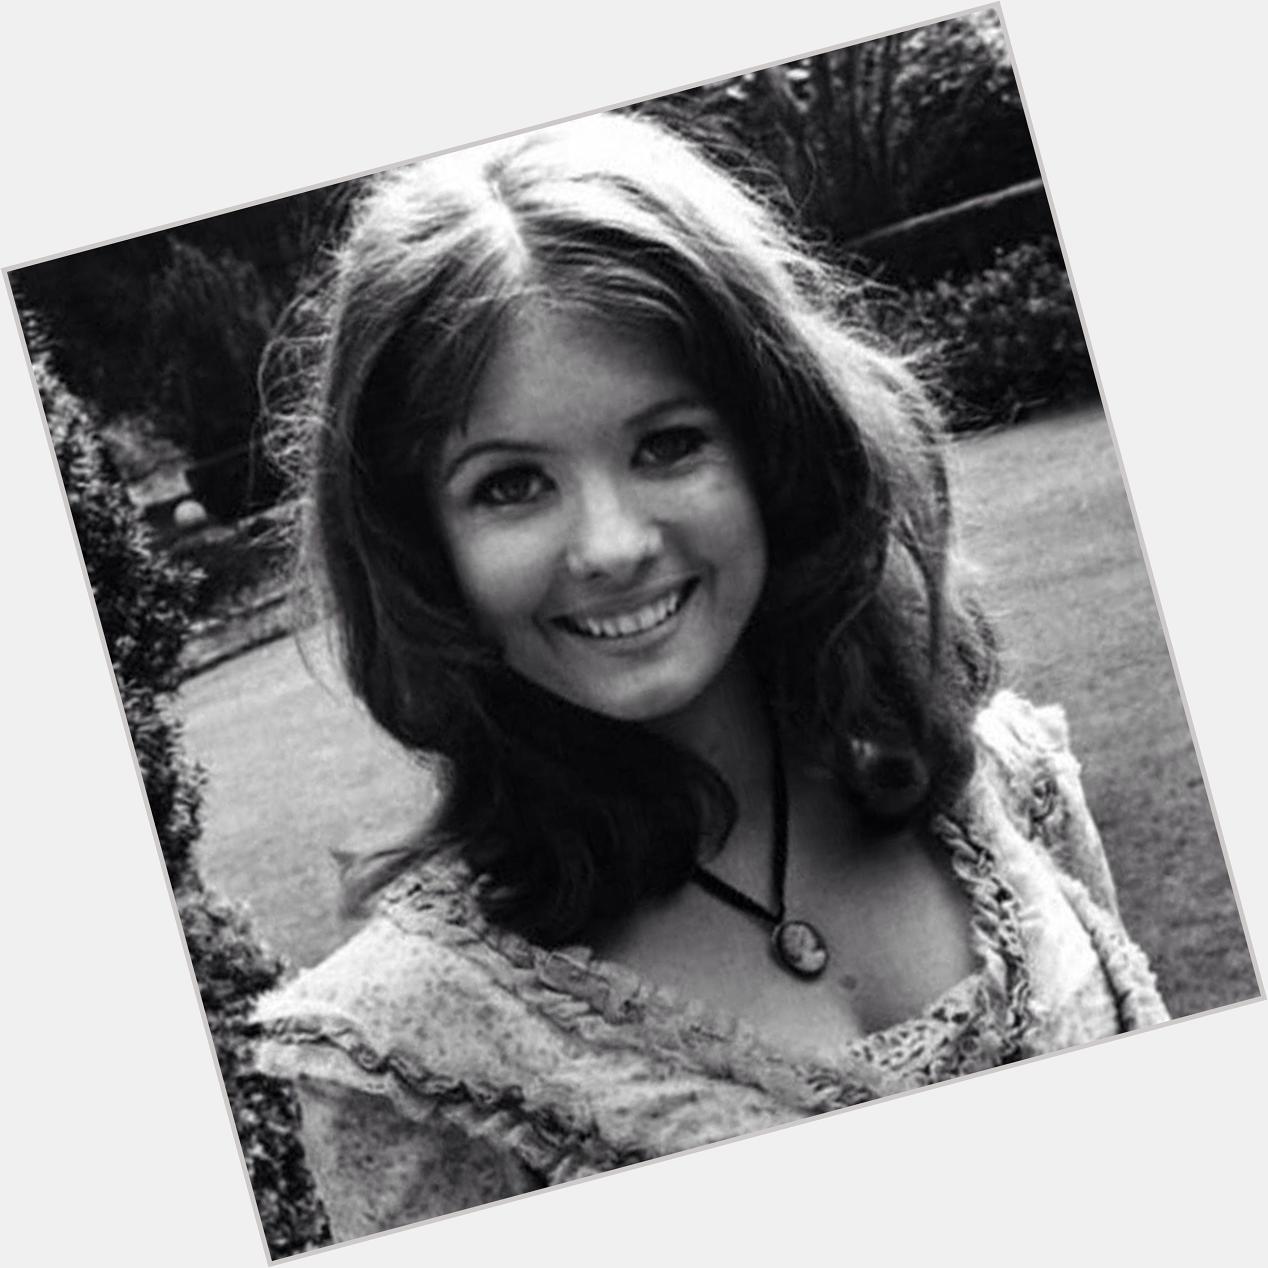 A very happy birthday to Deborah Watling, who played the companion Victoria Waterfield from 1967-68. 